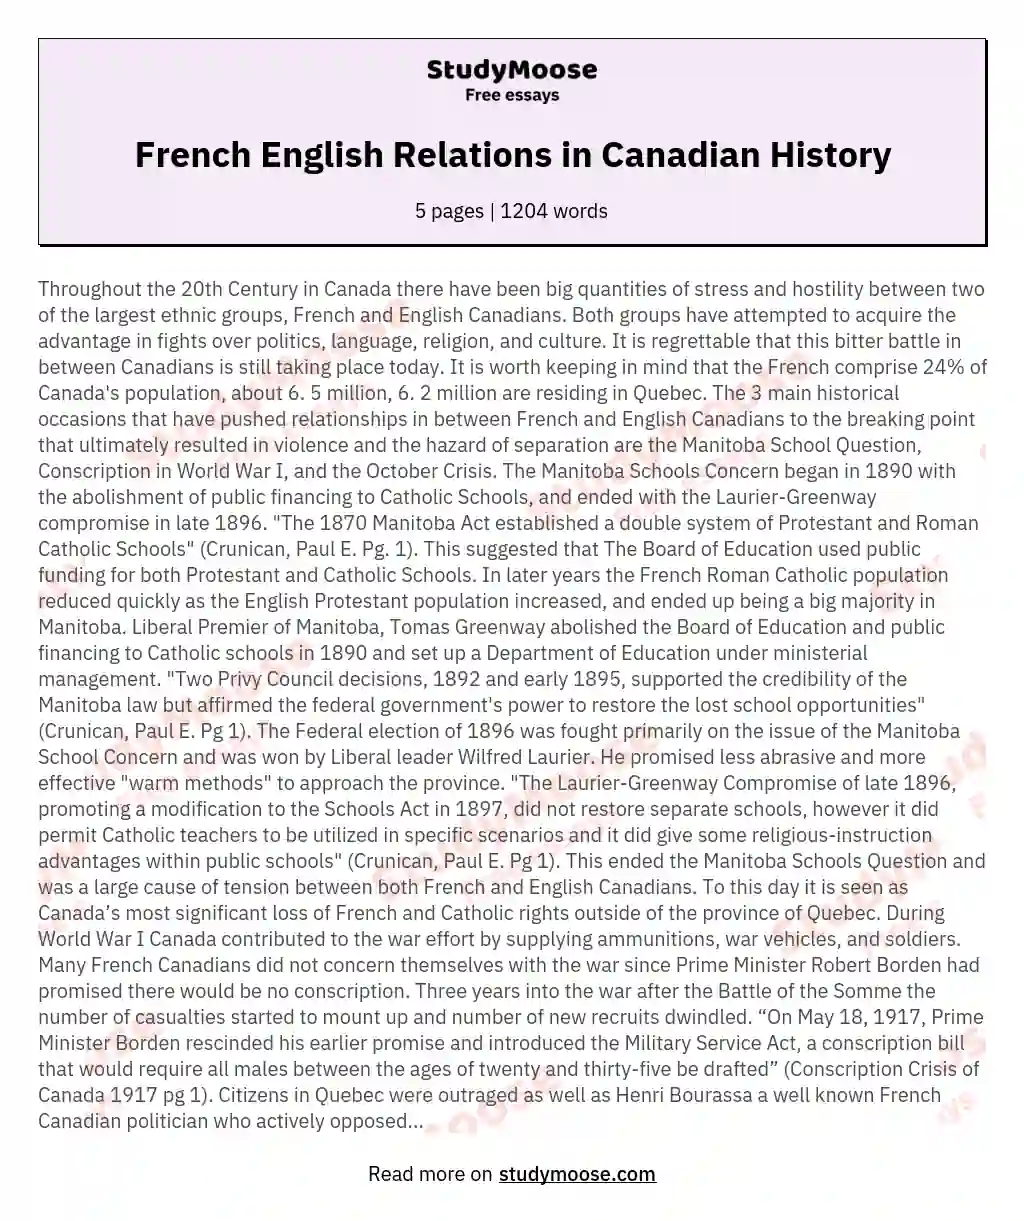 French English Relations in Canadian History essay